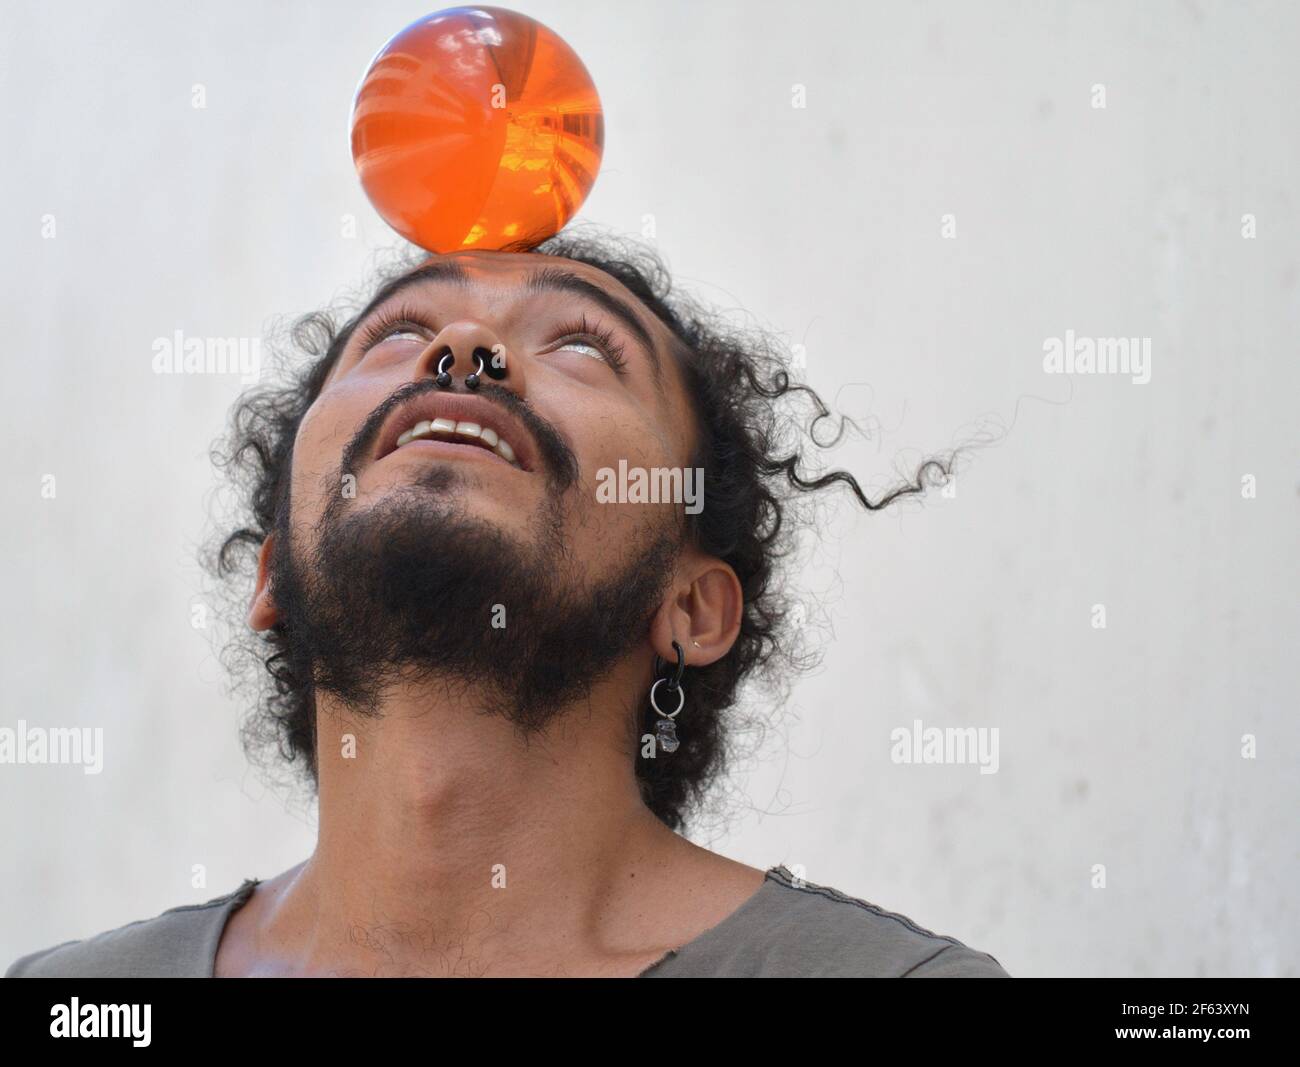 Handsome young Mexican man with septum nose jewellery balances an orange plastic ball on his forehead. Stock Photo